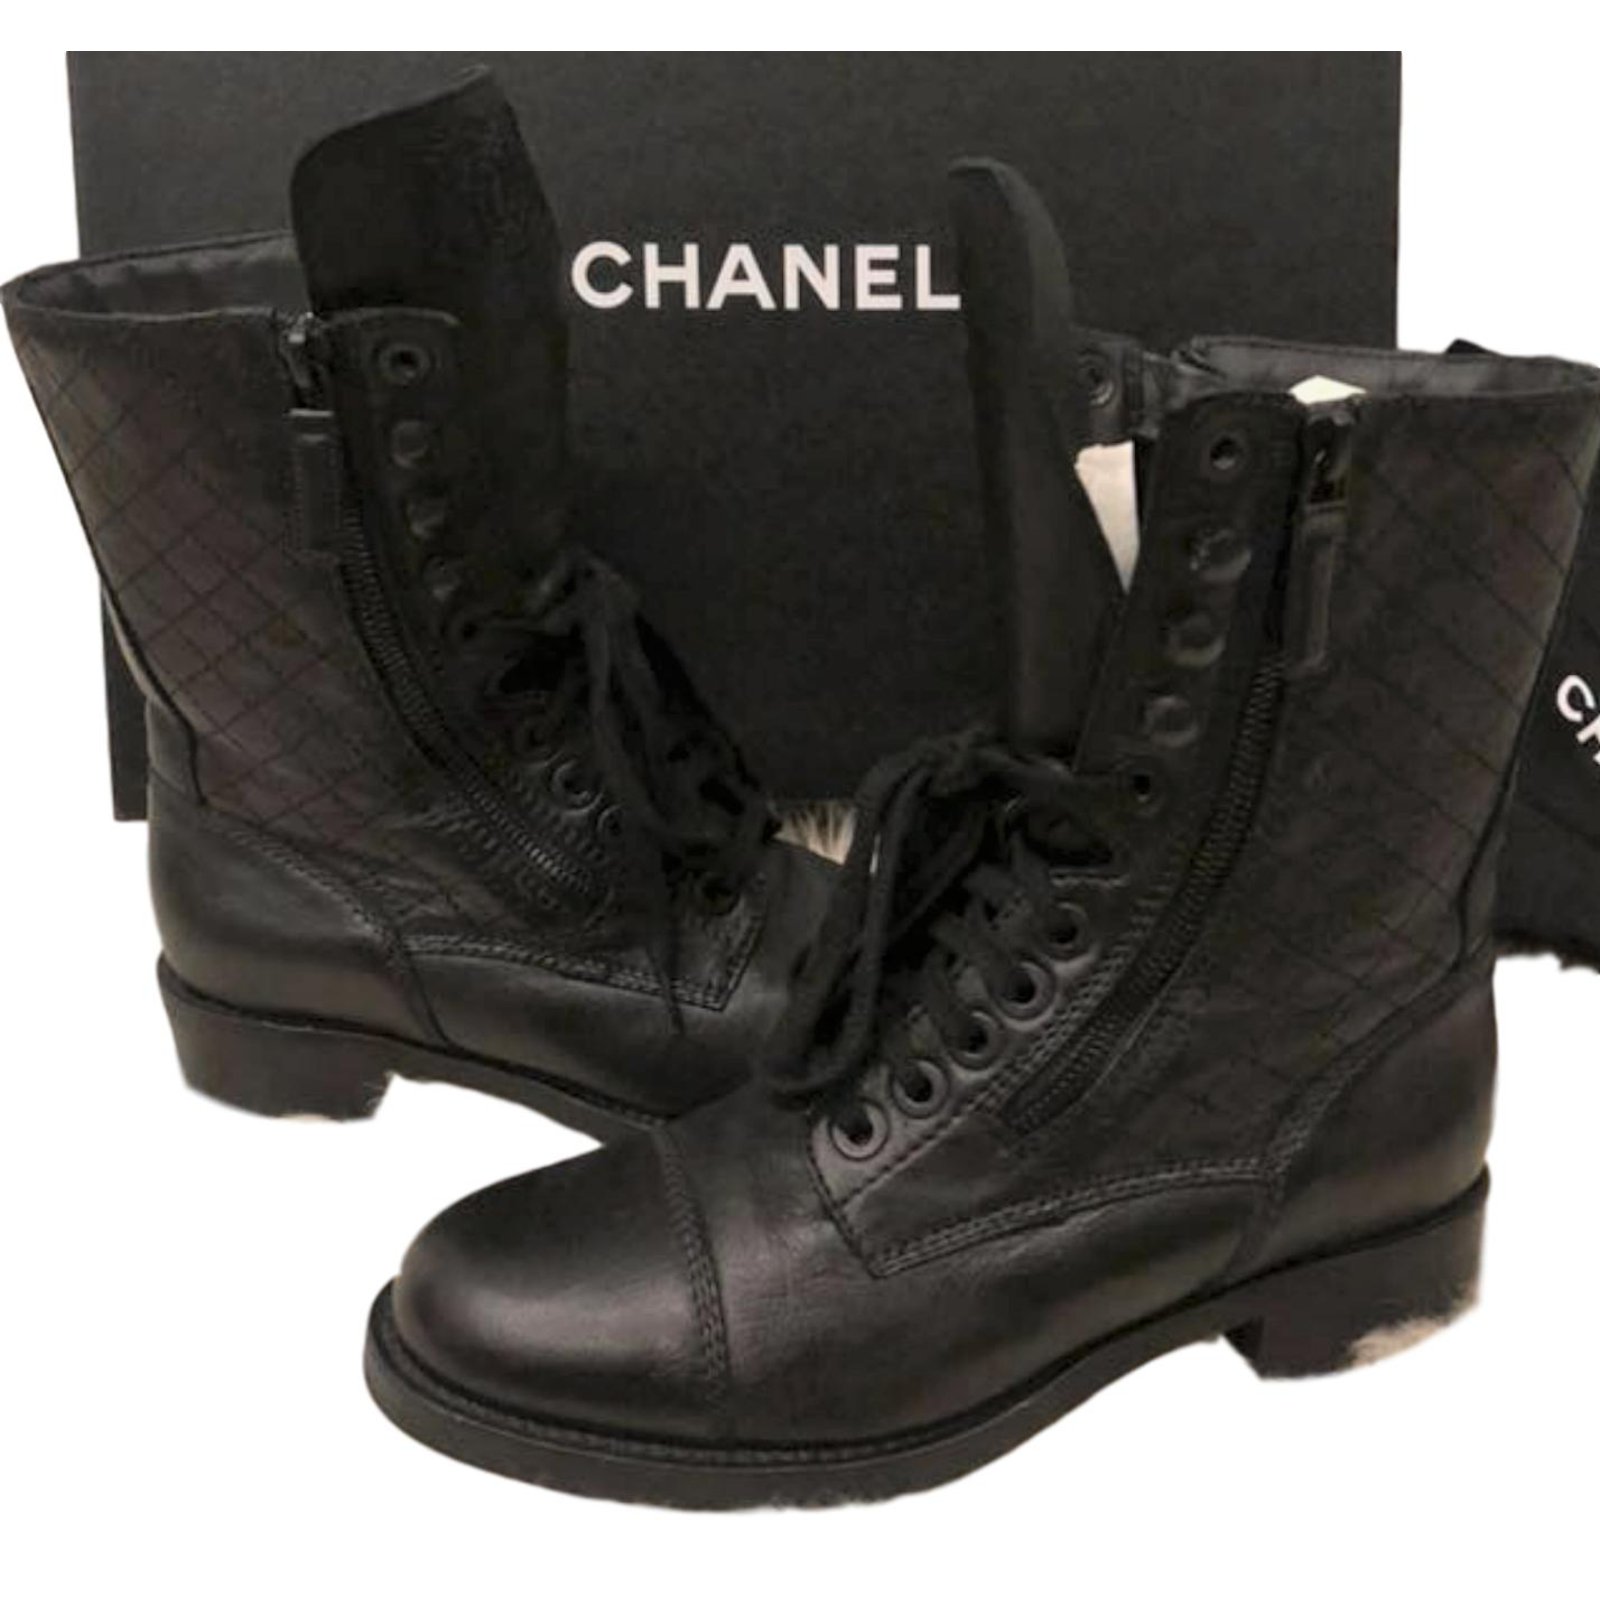 chanel combat boots 2019